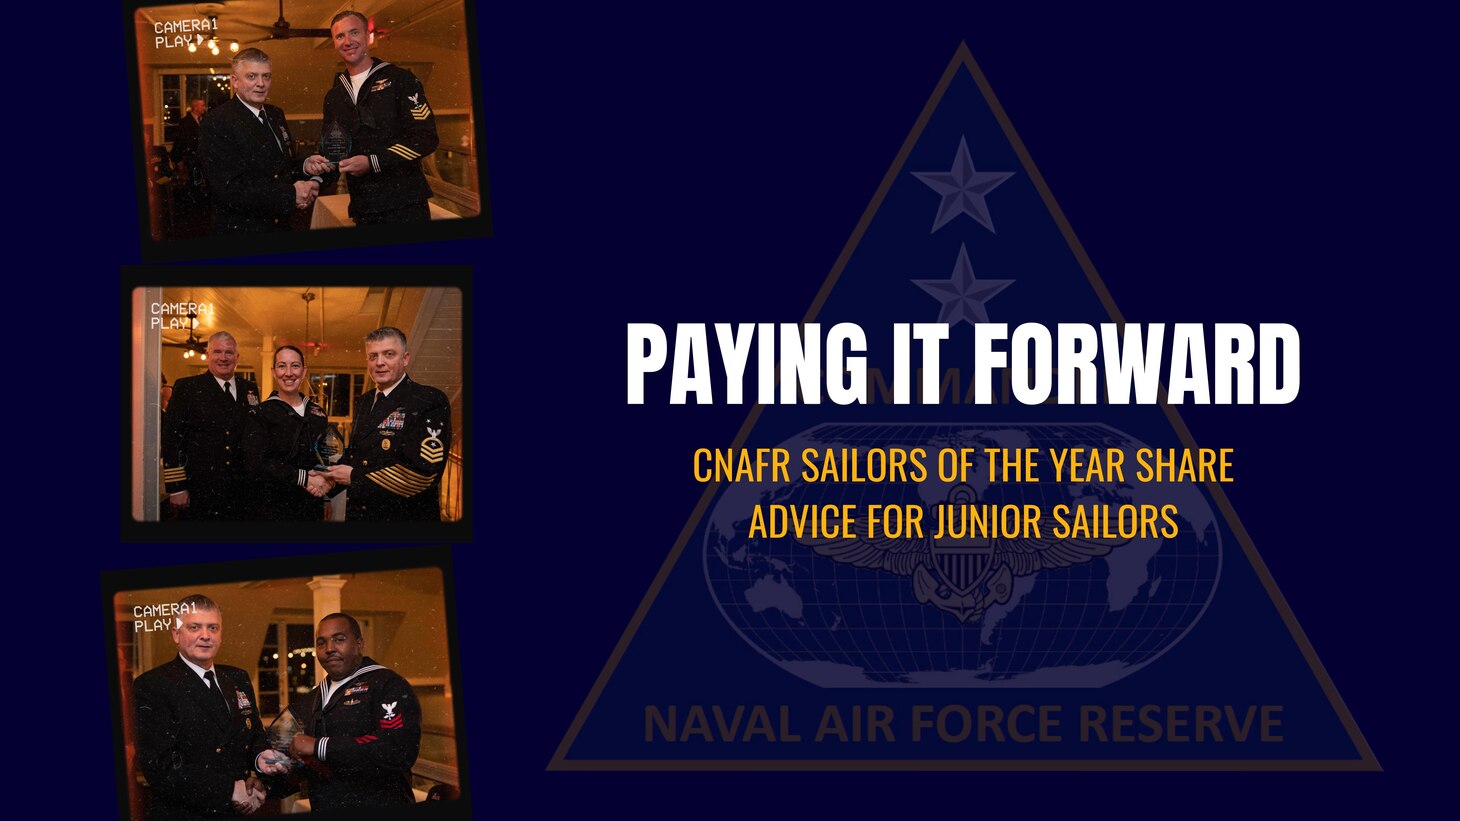 Paying it Forward: CNAFR Sailors of the Year Share Advice for Junior Sailors